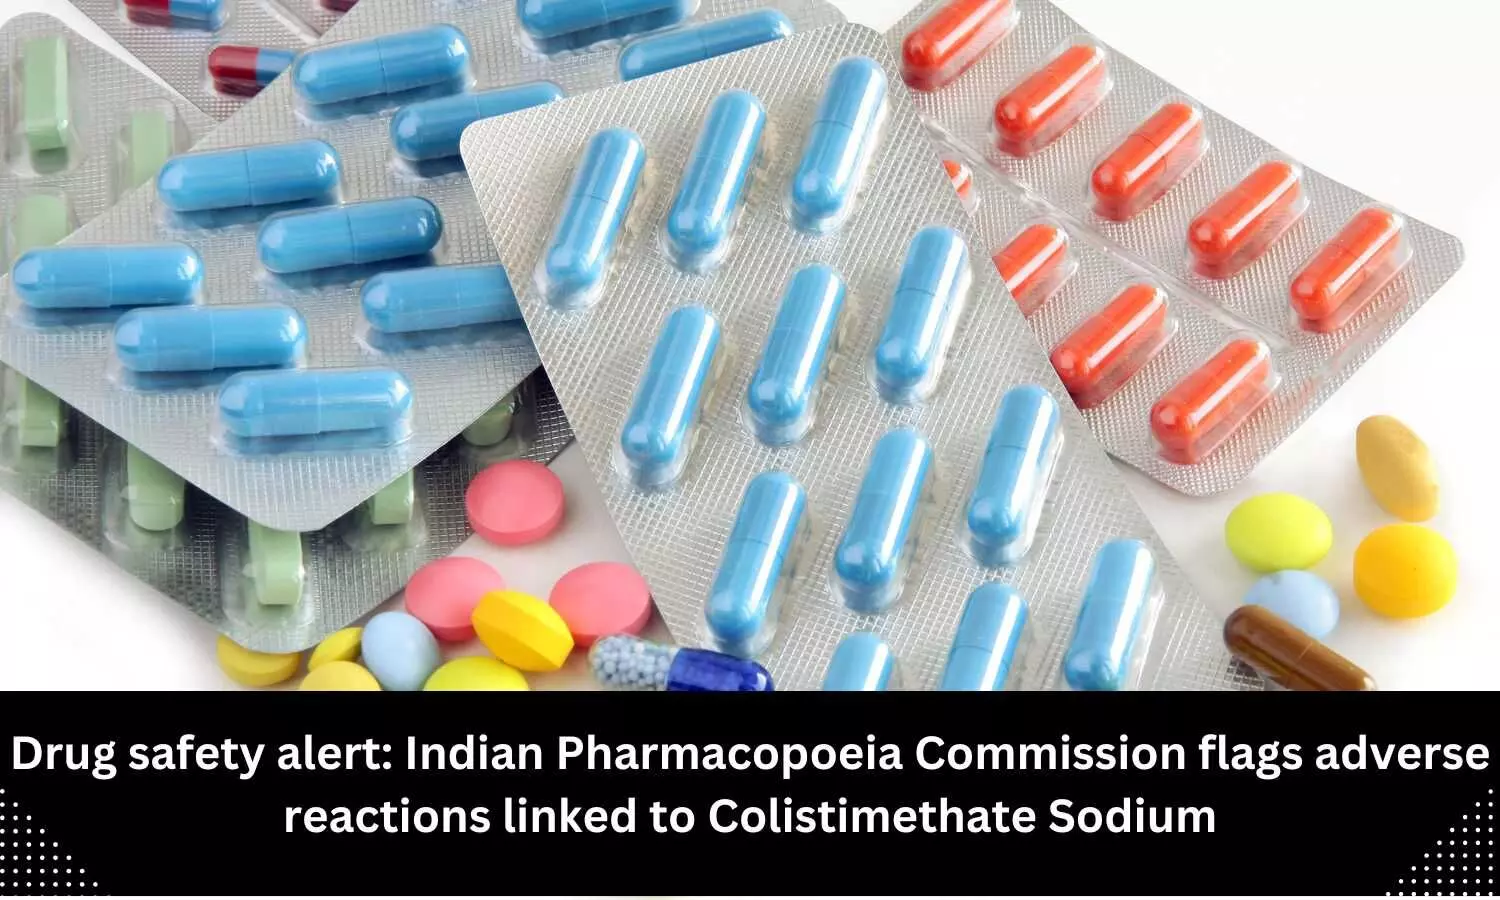 Drug safety alert: Adverse reactions linked to Colistimethate Sodium flagged by Indian Pharmacopoeia Commission